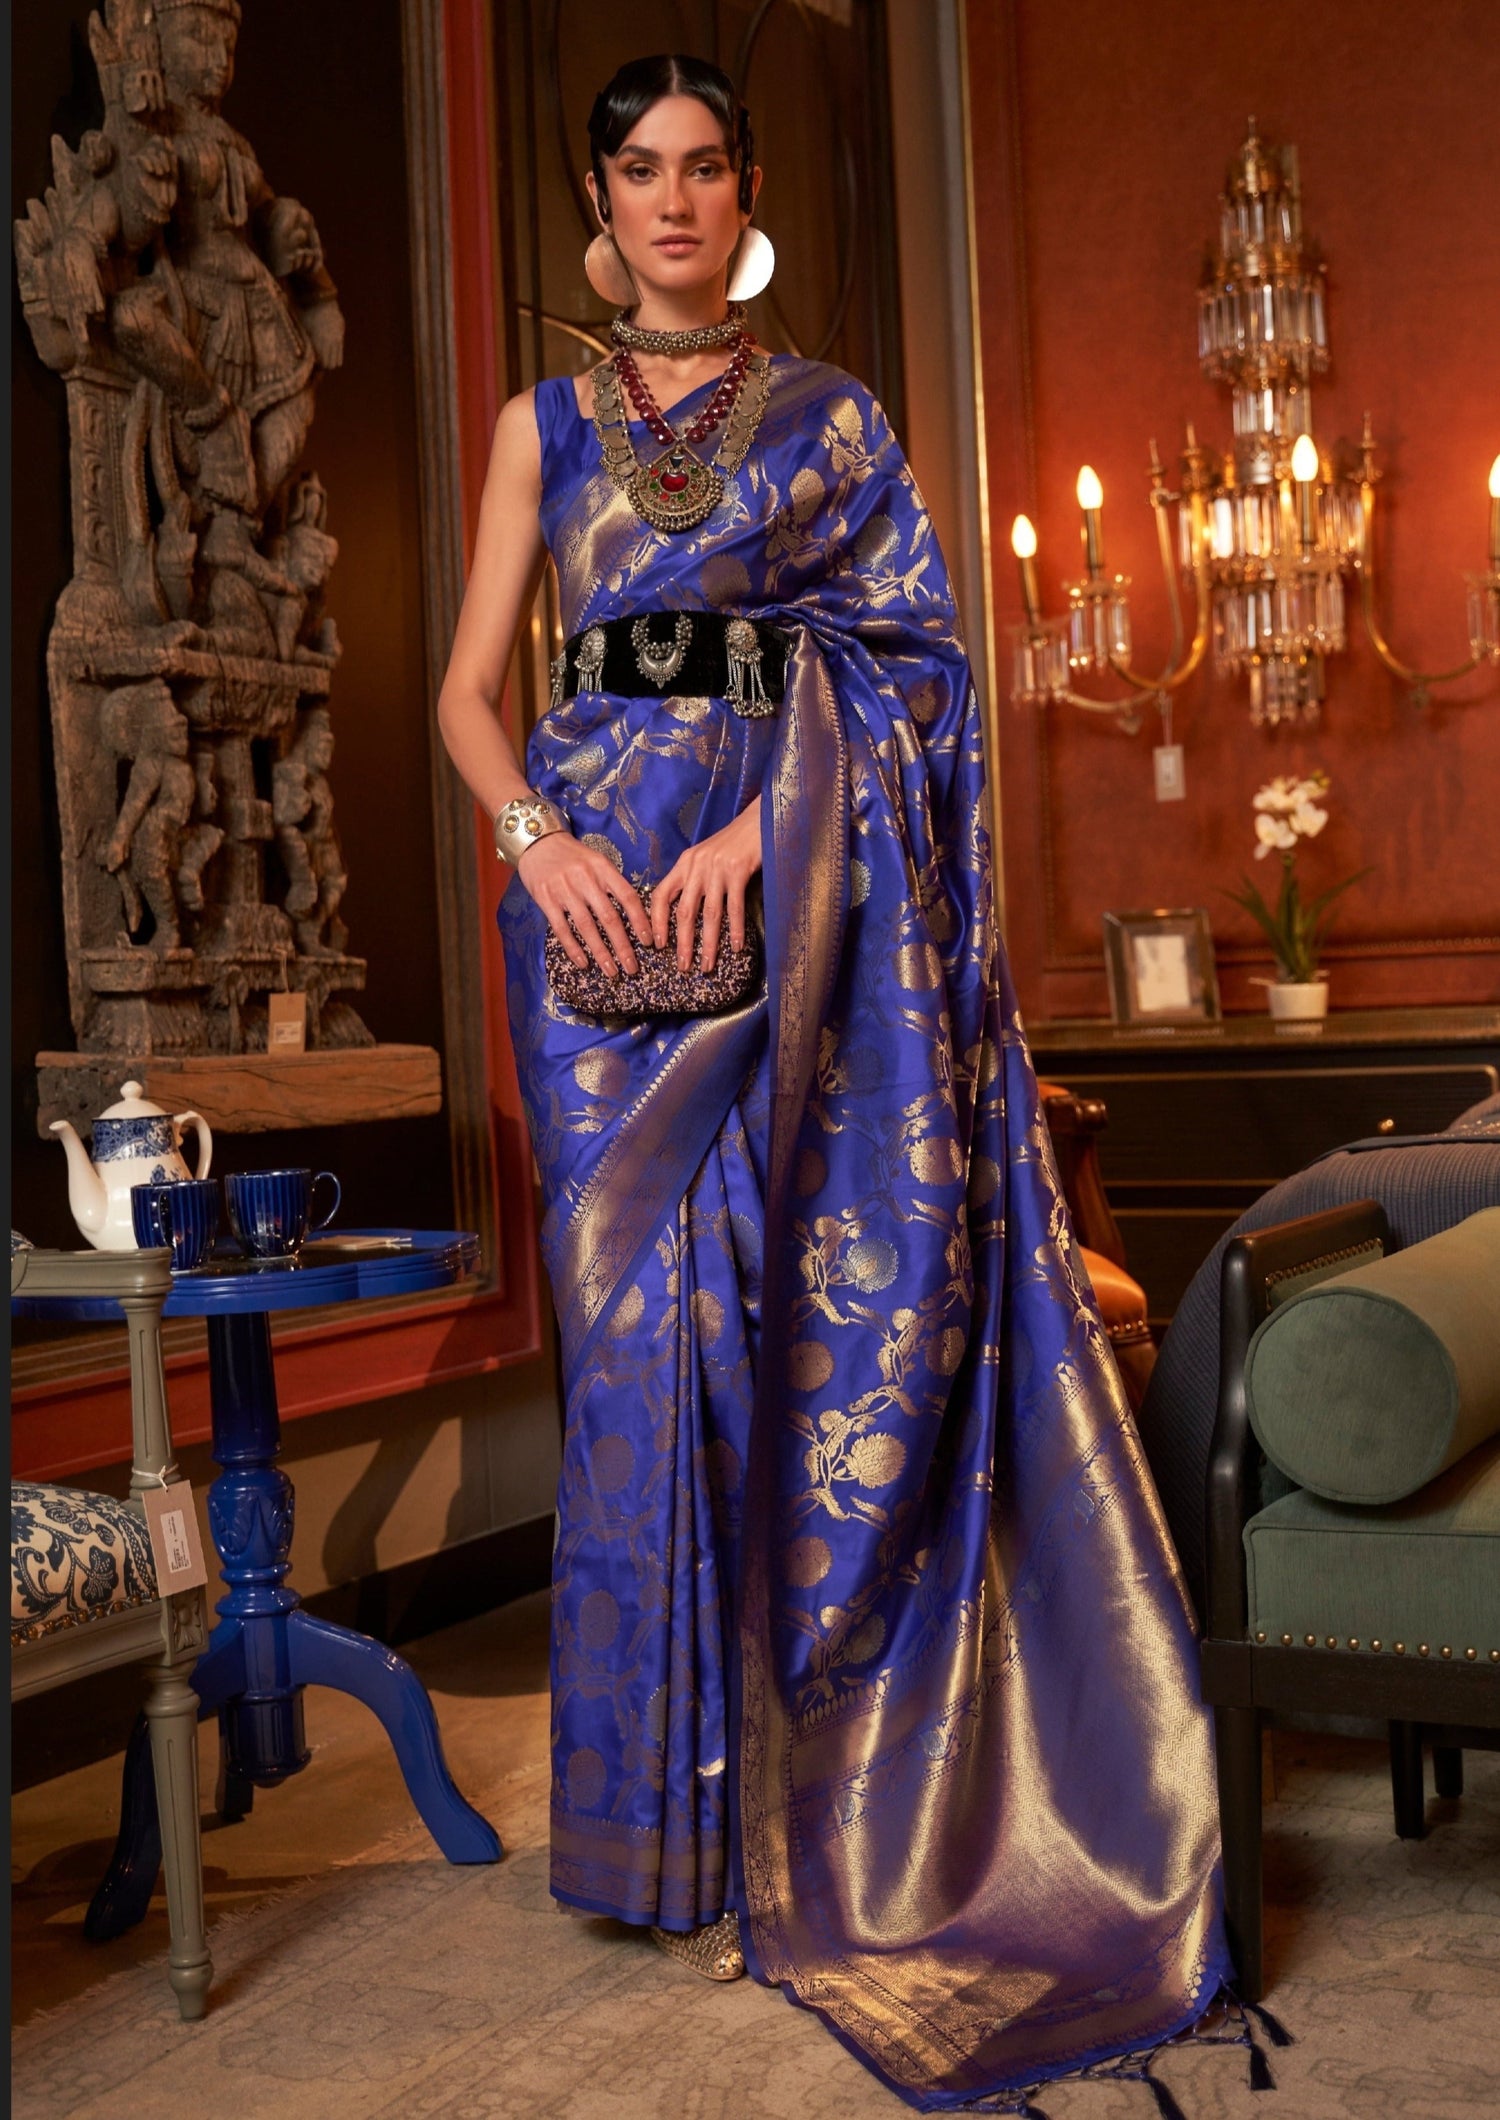 The Gorgeous Royal Blue Saree Looking Absolutely Irresistible as Always  This Pure Orgenza Sarees Are a Stunner in Bright as Pastel Shades - Etsy